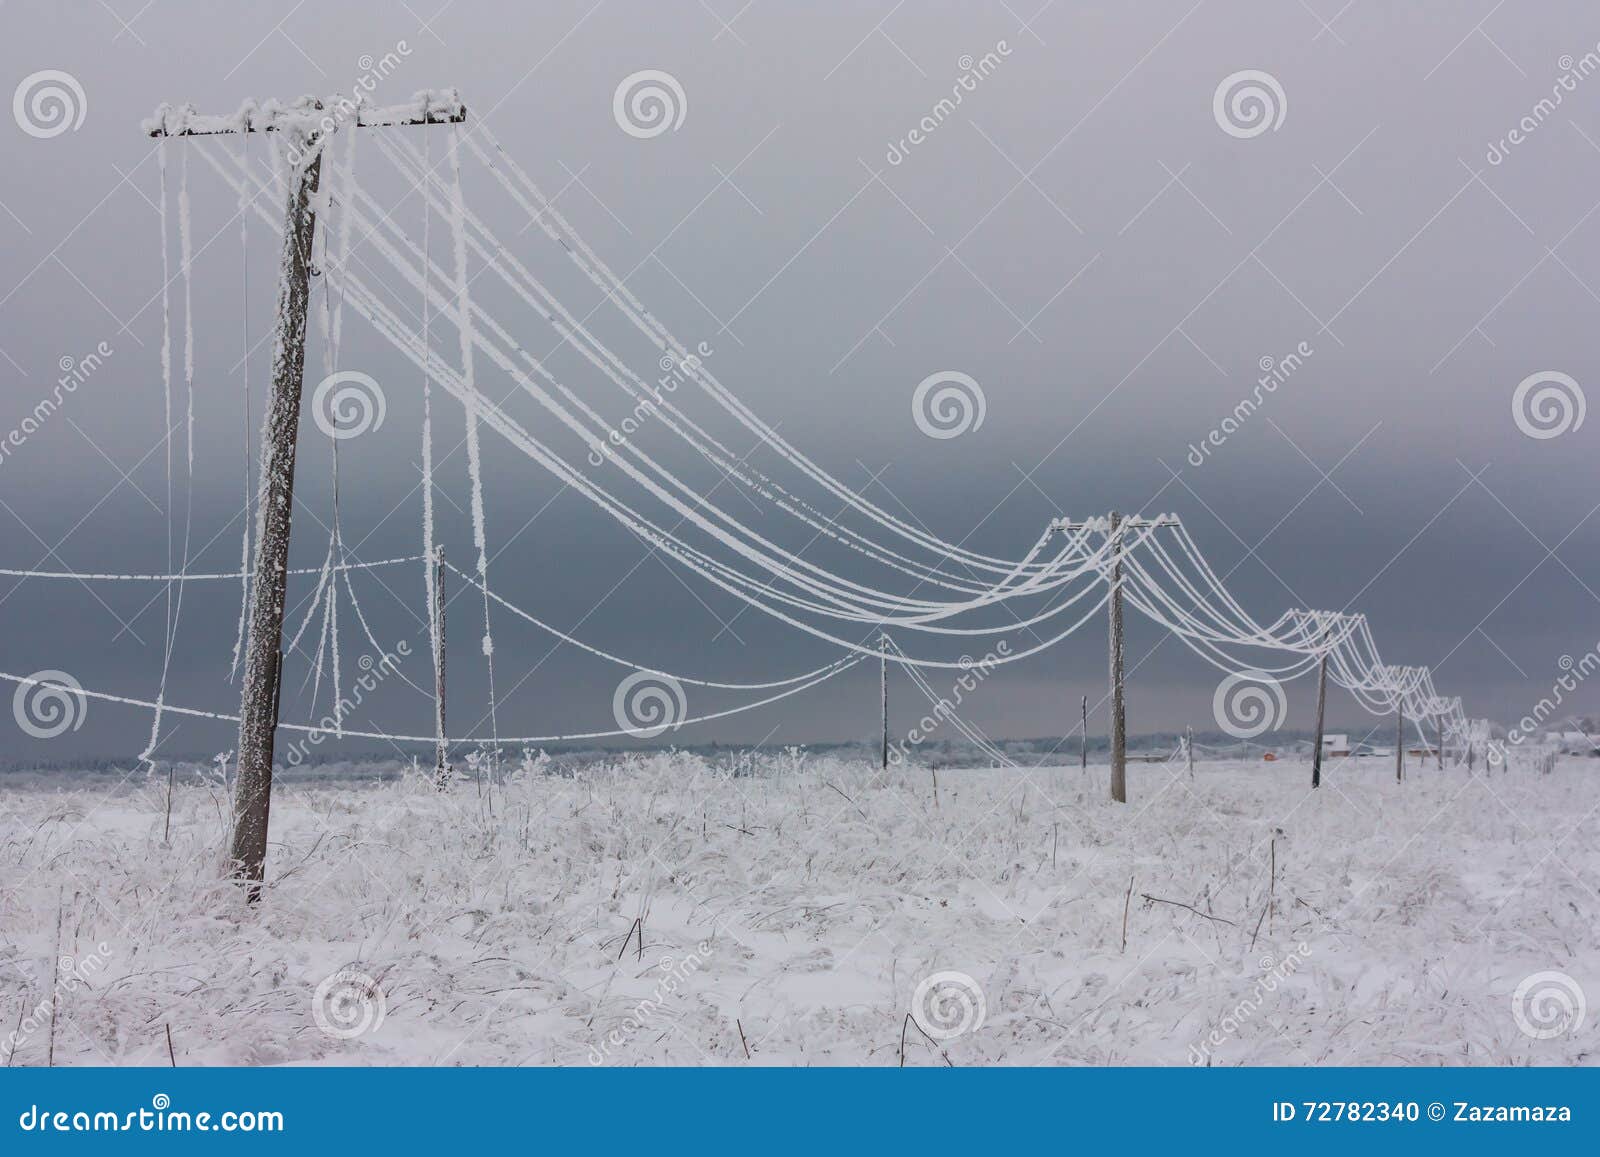 broken phase electrical power lines with hoarfrost on the wooden electric poles on countryside in the winter after storm